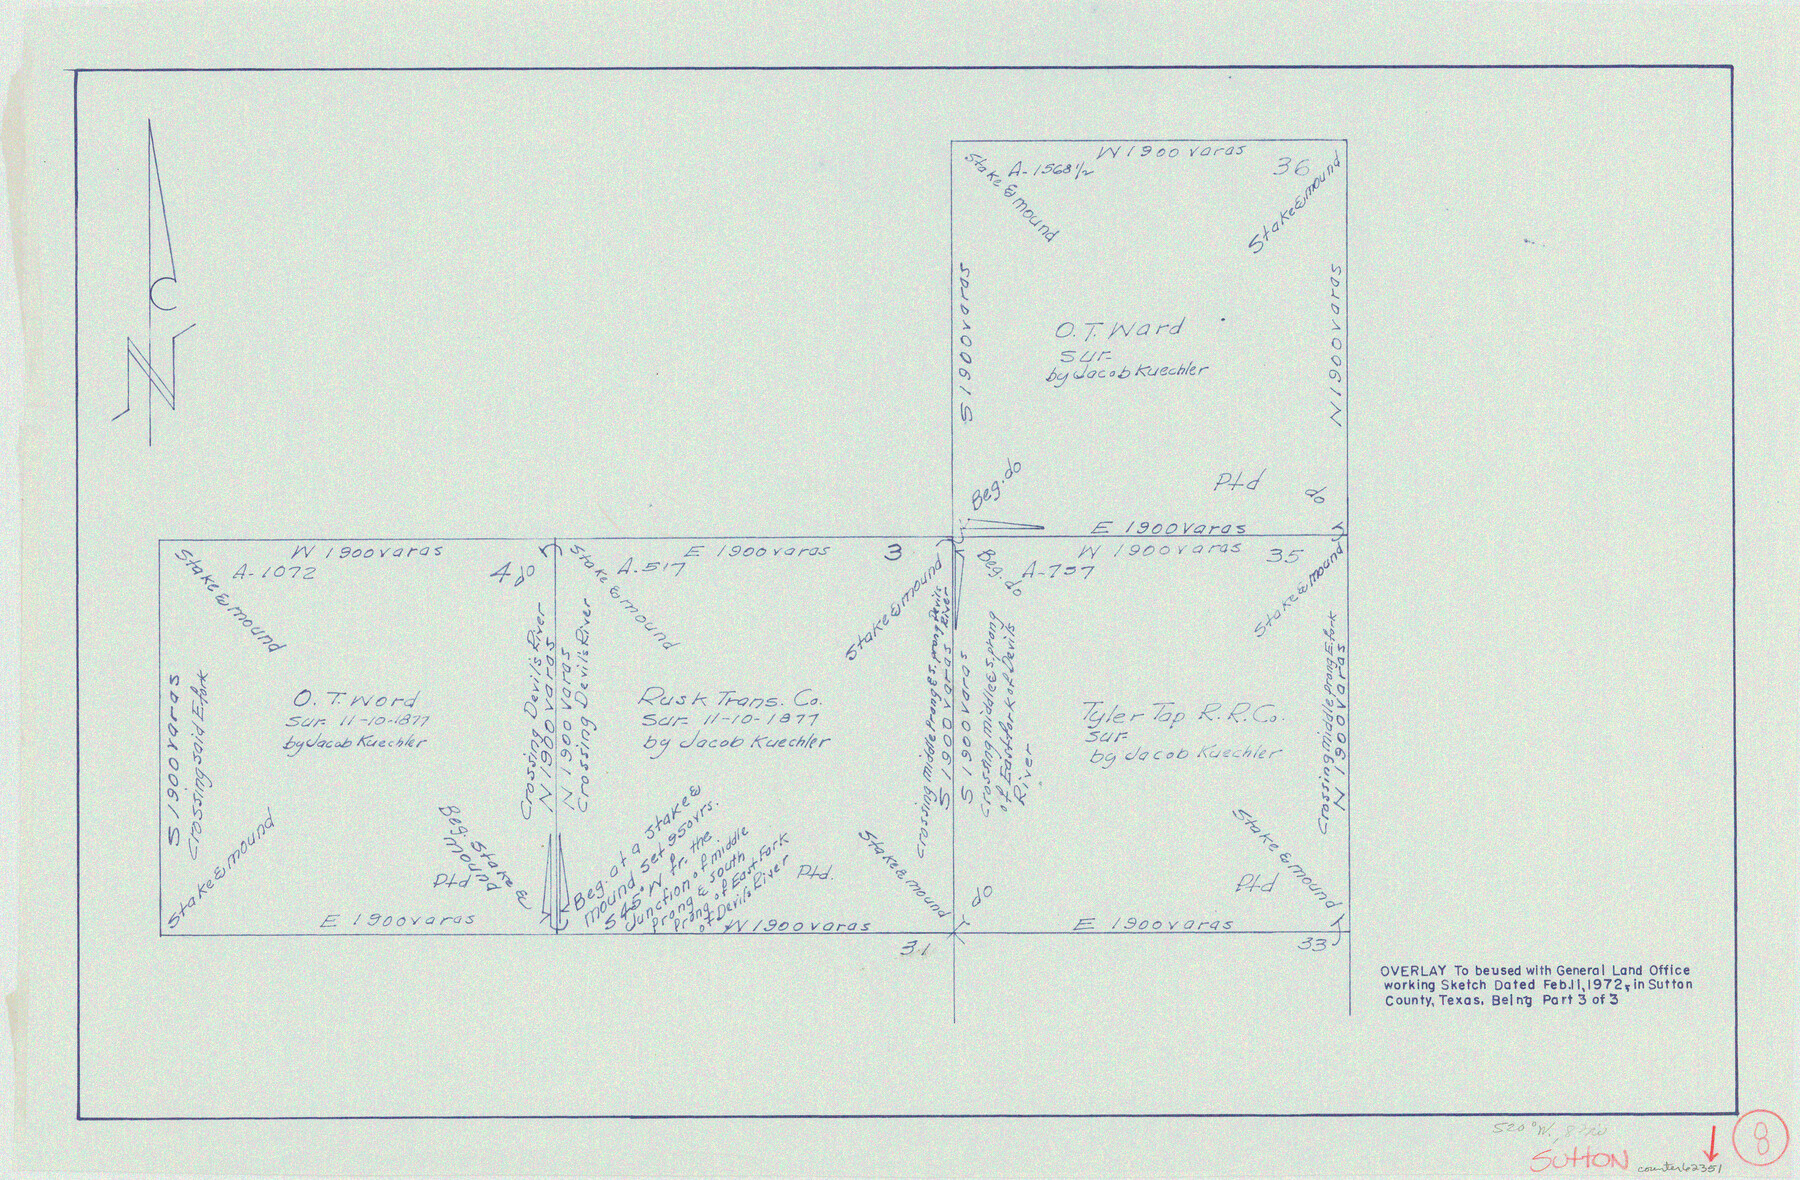 62351, Sutton County Working Sketch 8, General Map Collection